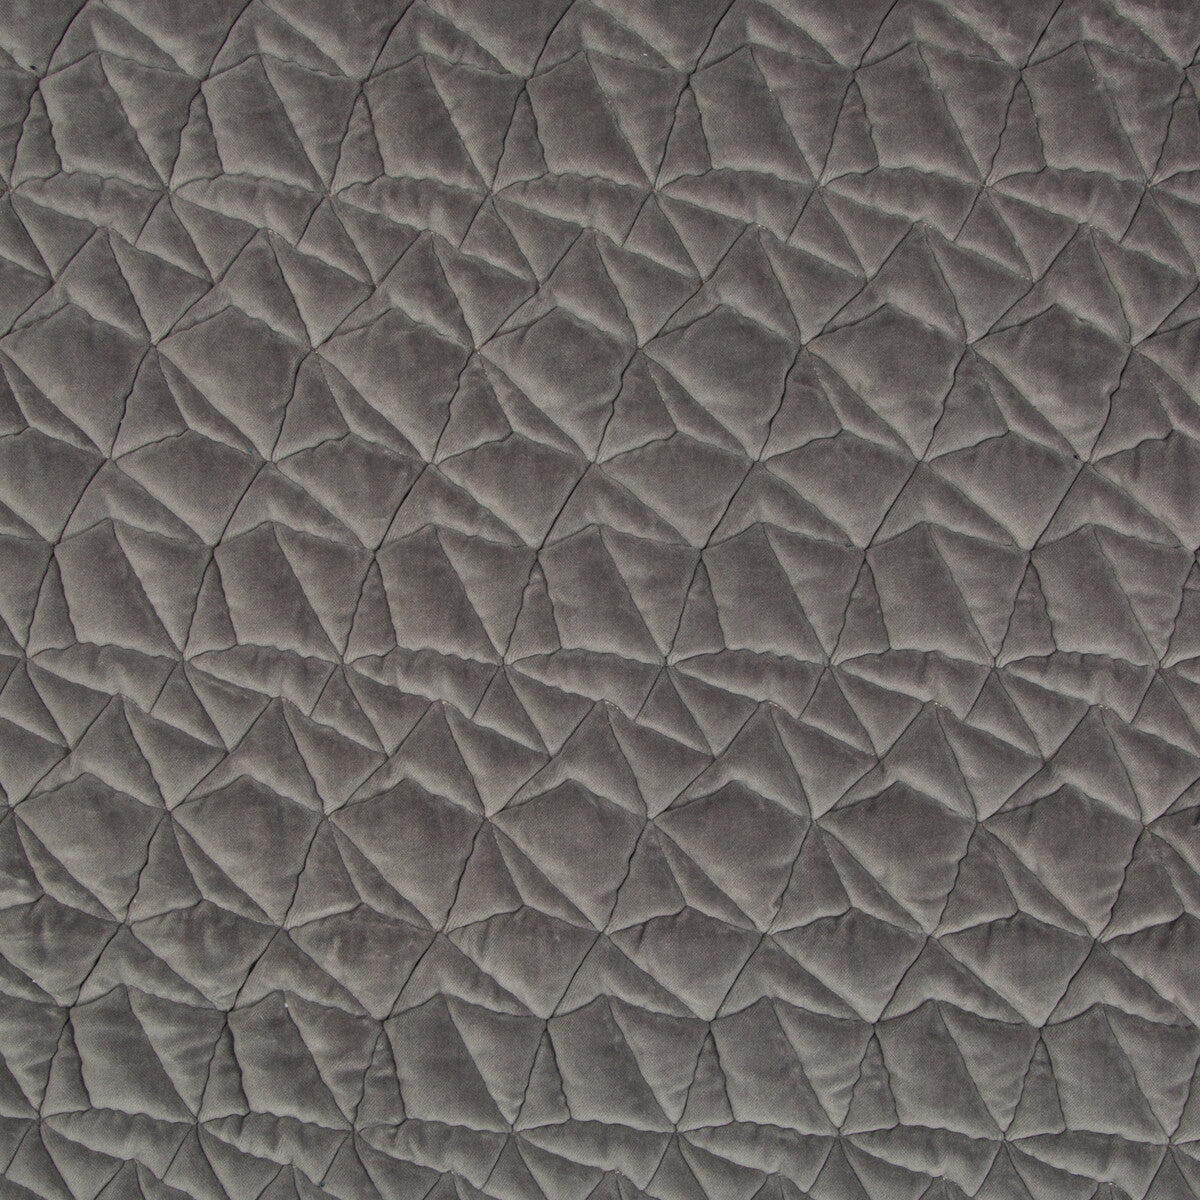 Taking Shape fabric in pewter color - pattern 34922.21.0 - by Kravet Couture in the Modern Tailor collection